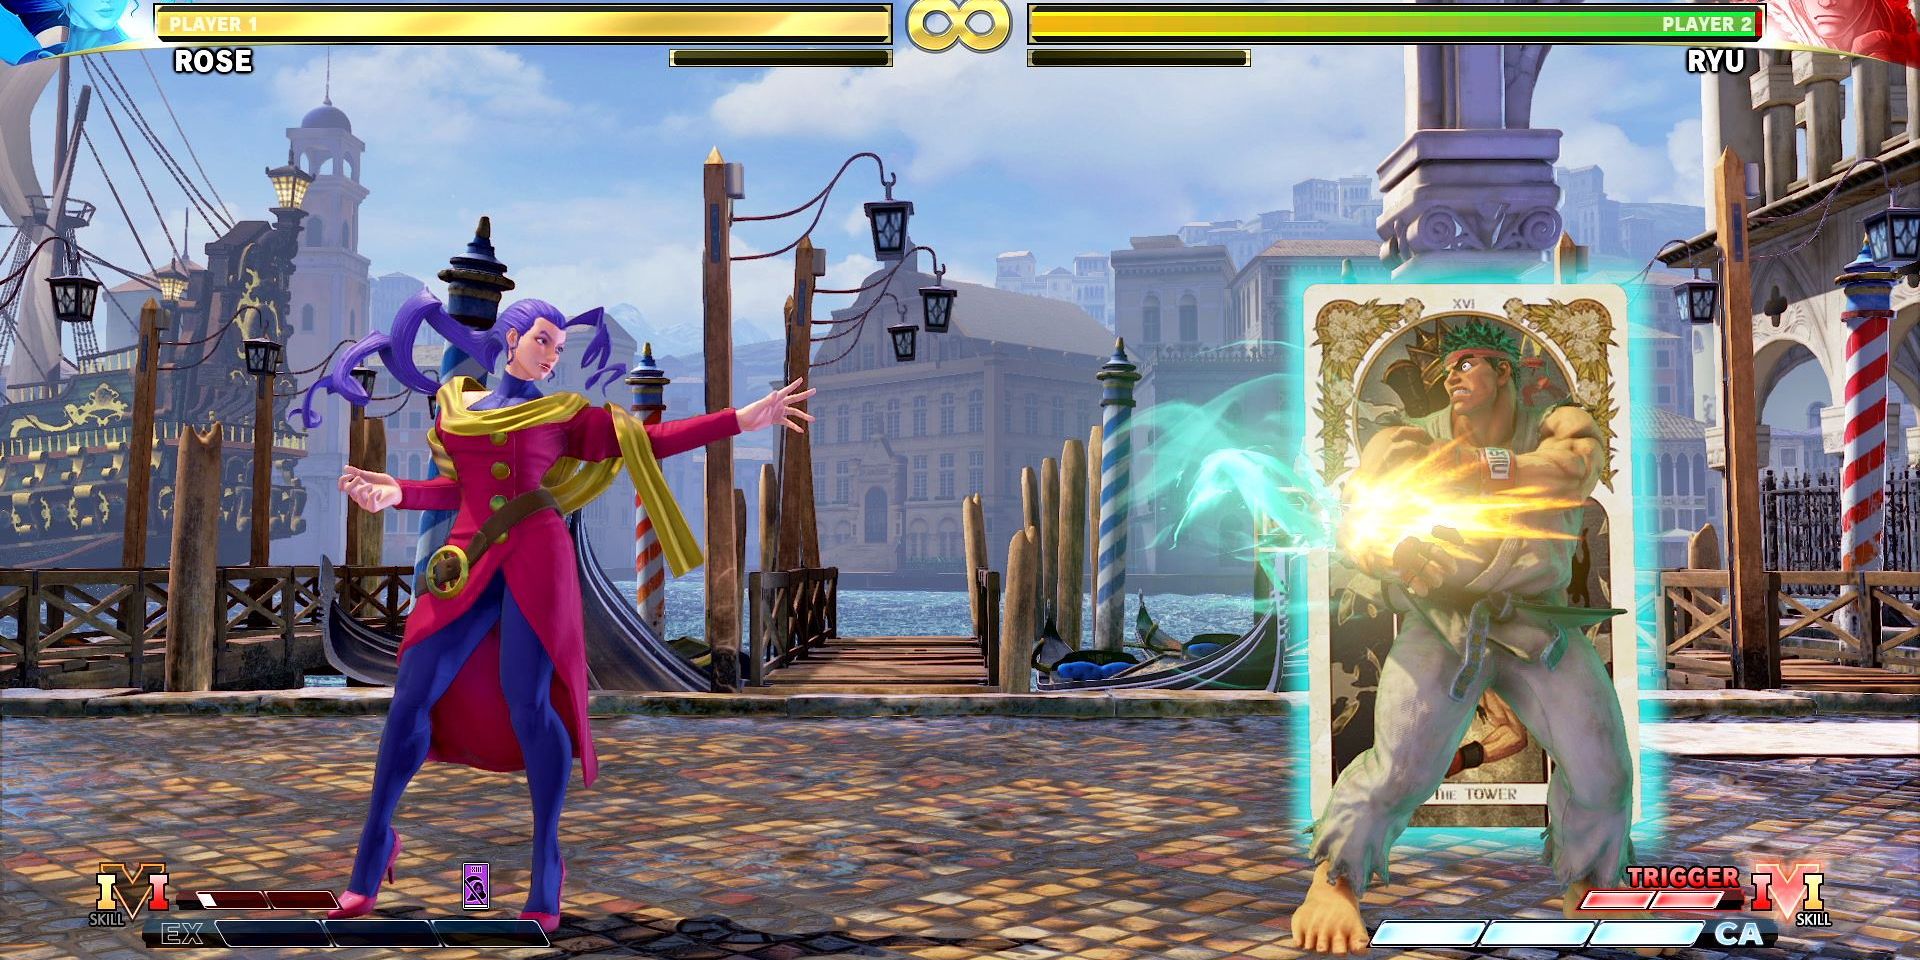 Rose hitting Ryu with her Soul Fortune card in Street Fighter V